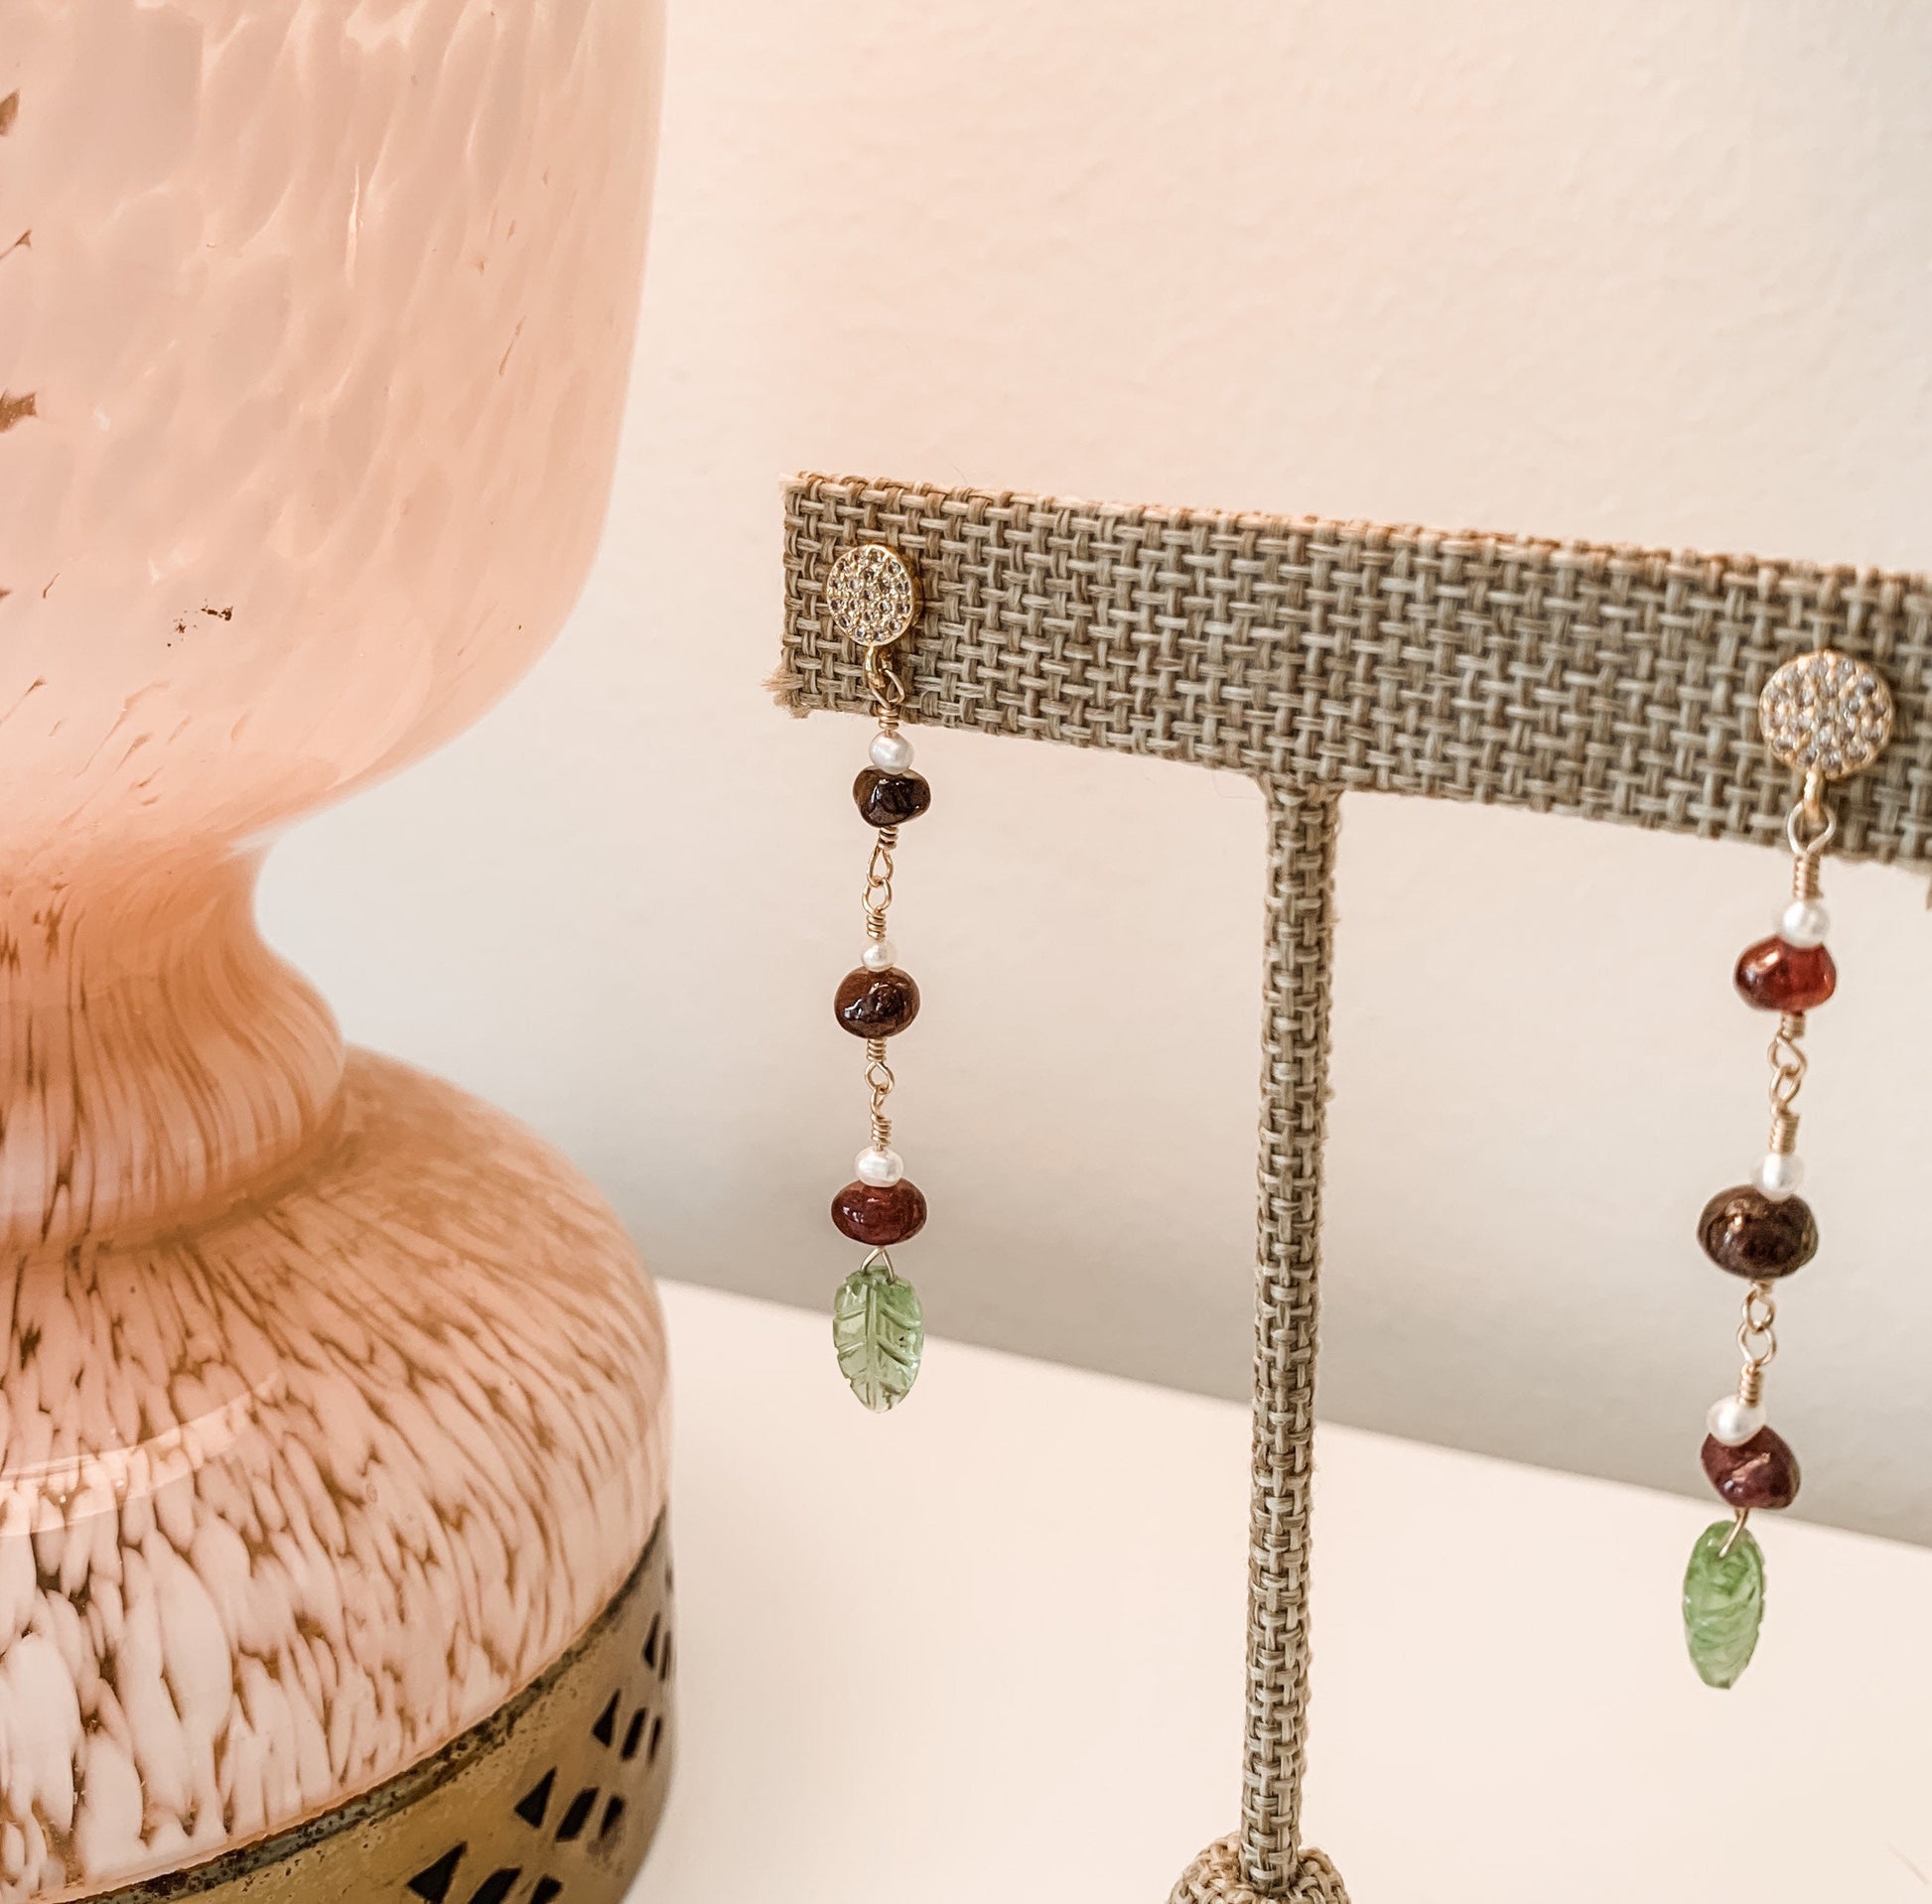 yellow gold filled dangle earring with pave' cz round studs and 3 garnet and pearl stations suspended from chain. carved peridot leaves hang from the bottom.  